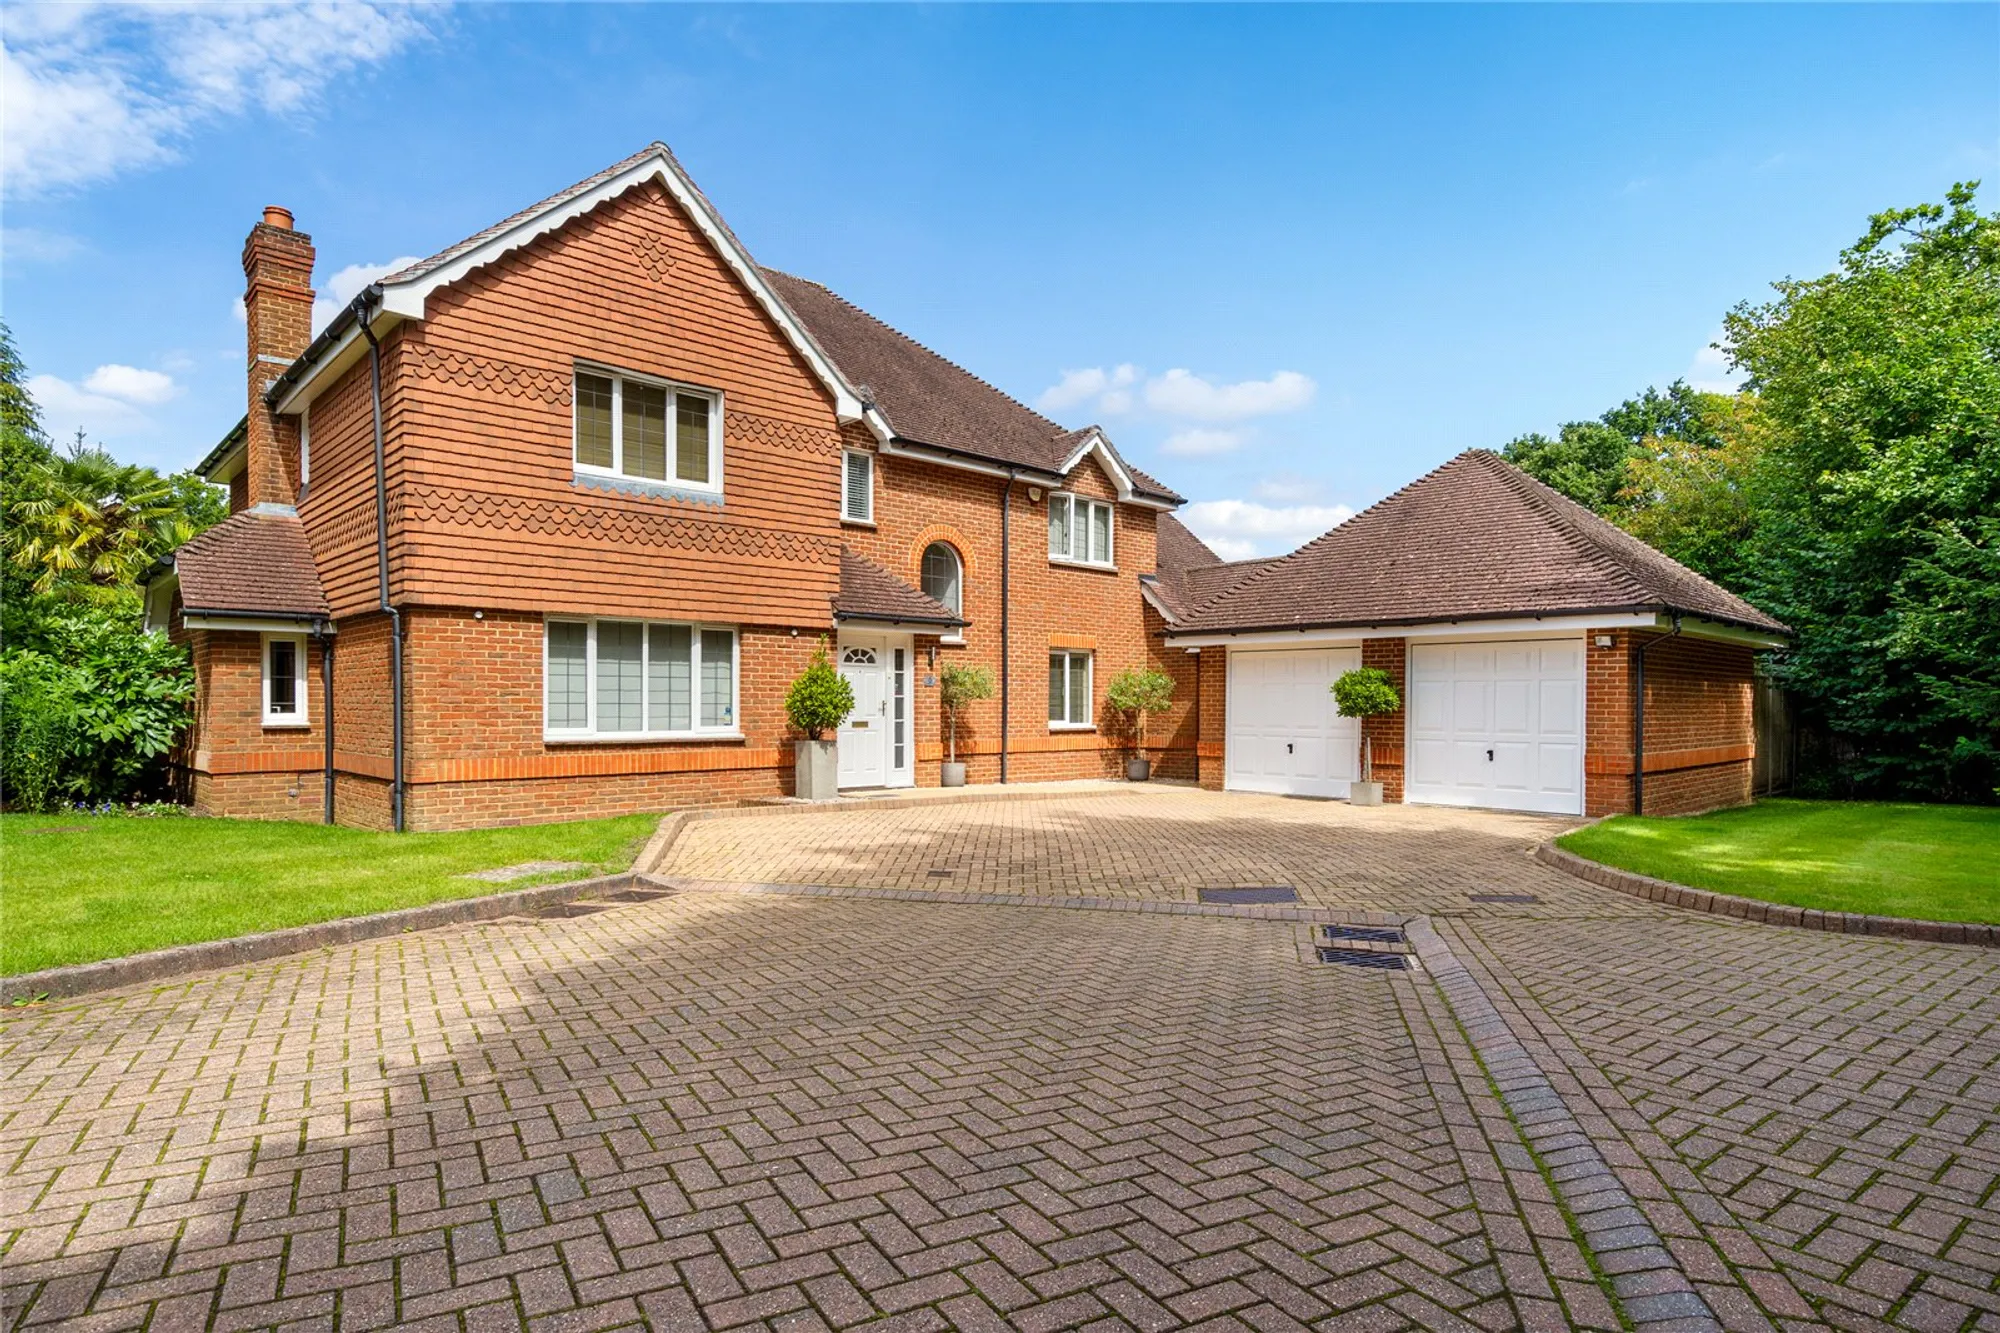 5 bed detached house for sale in Densham Drive, Purley  - Property Image 3